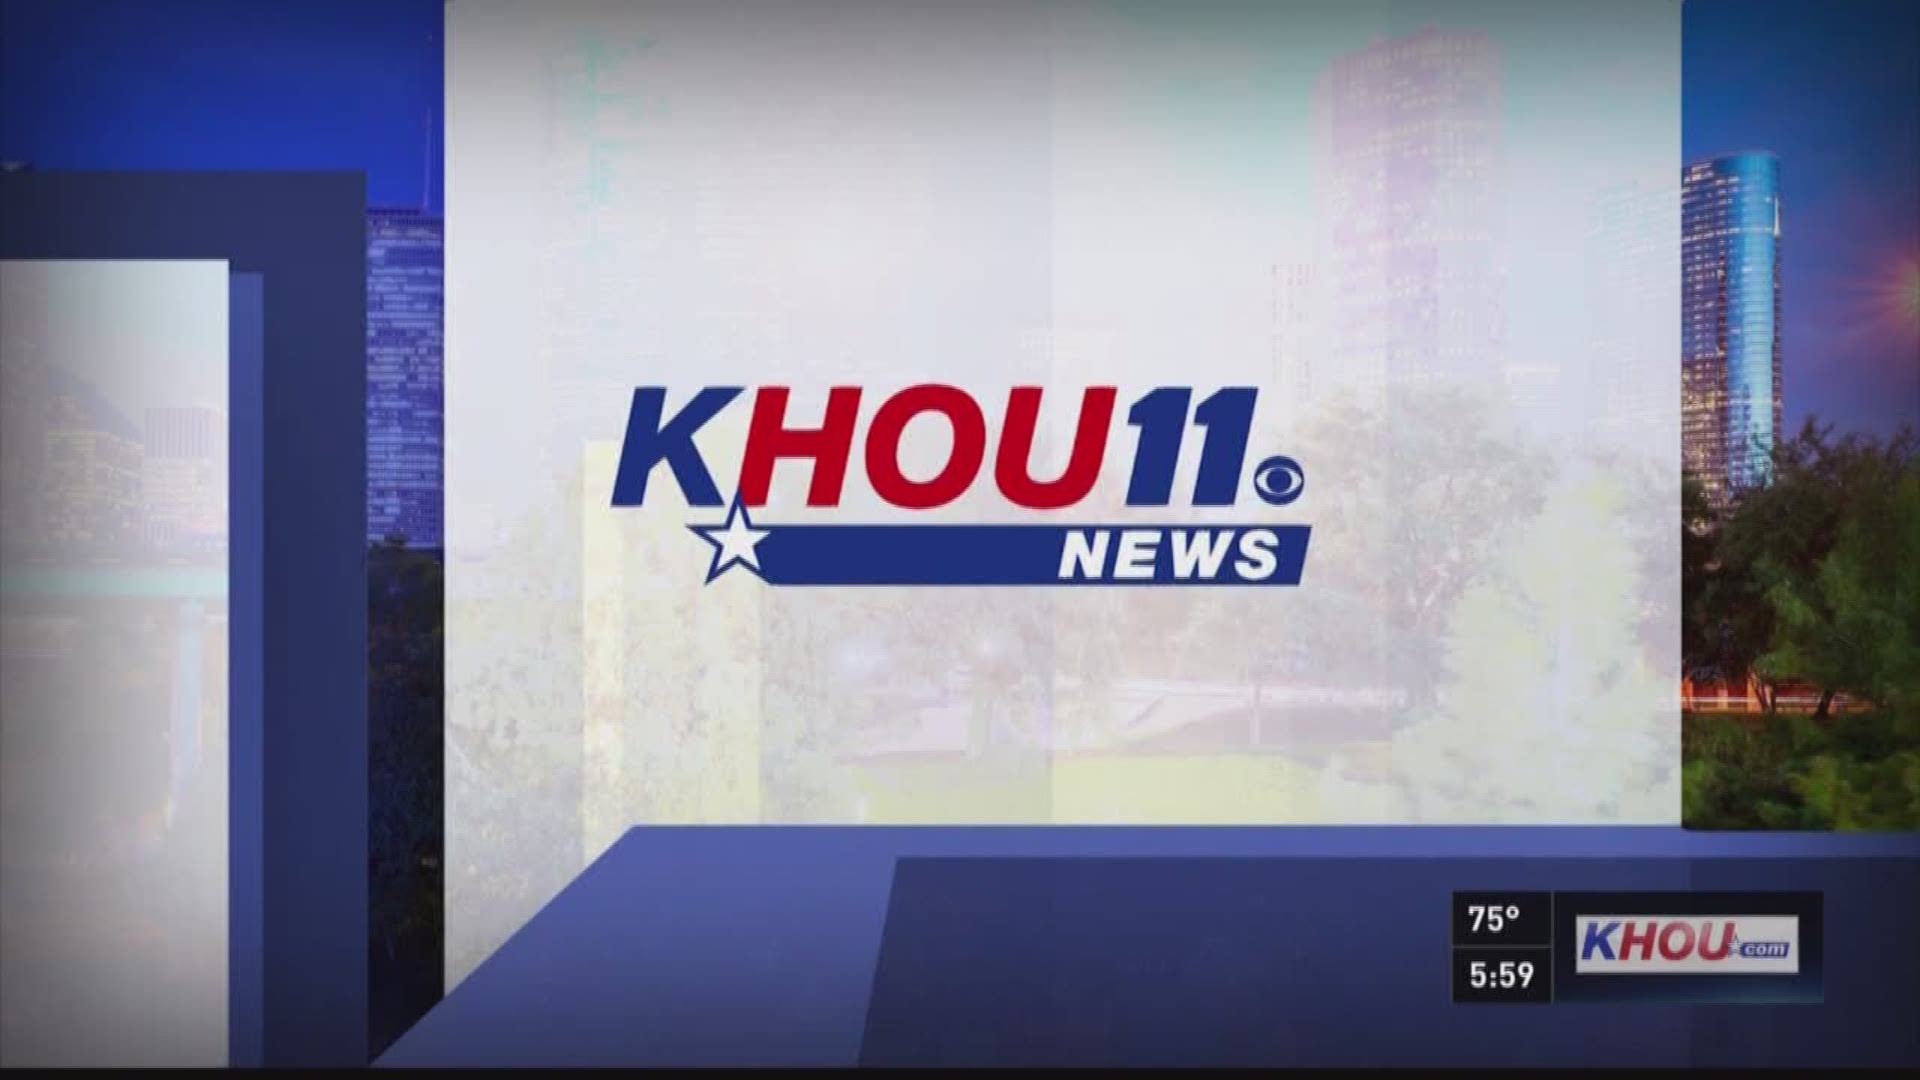 Here's a look at the top headlines on KHOU 11 News at 6 p.m. for April 12, 2018.